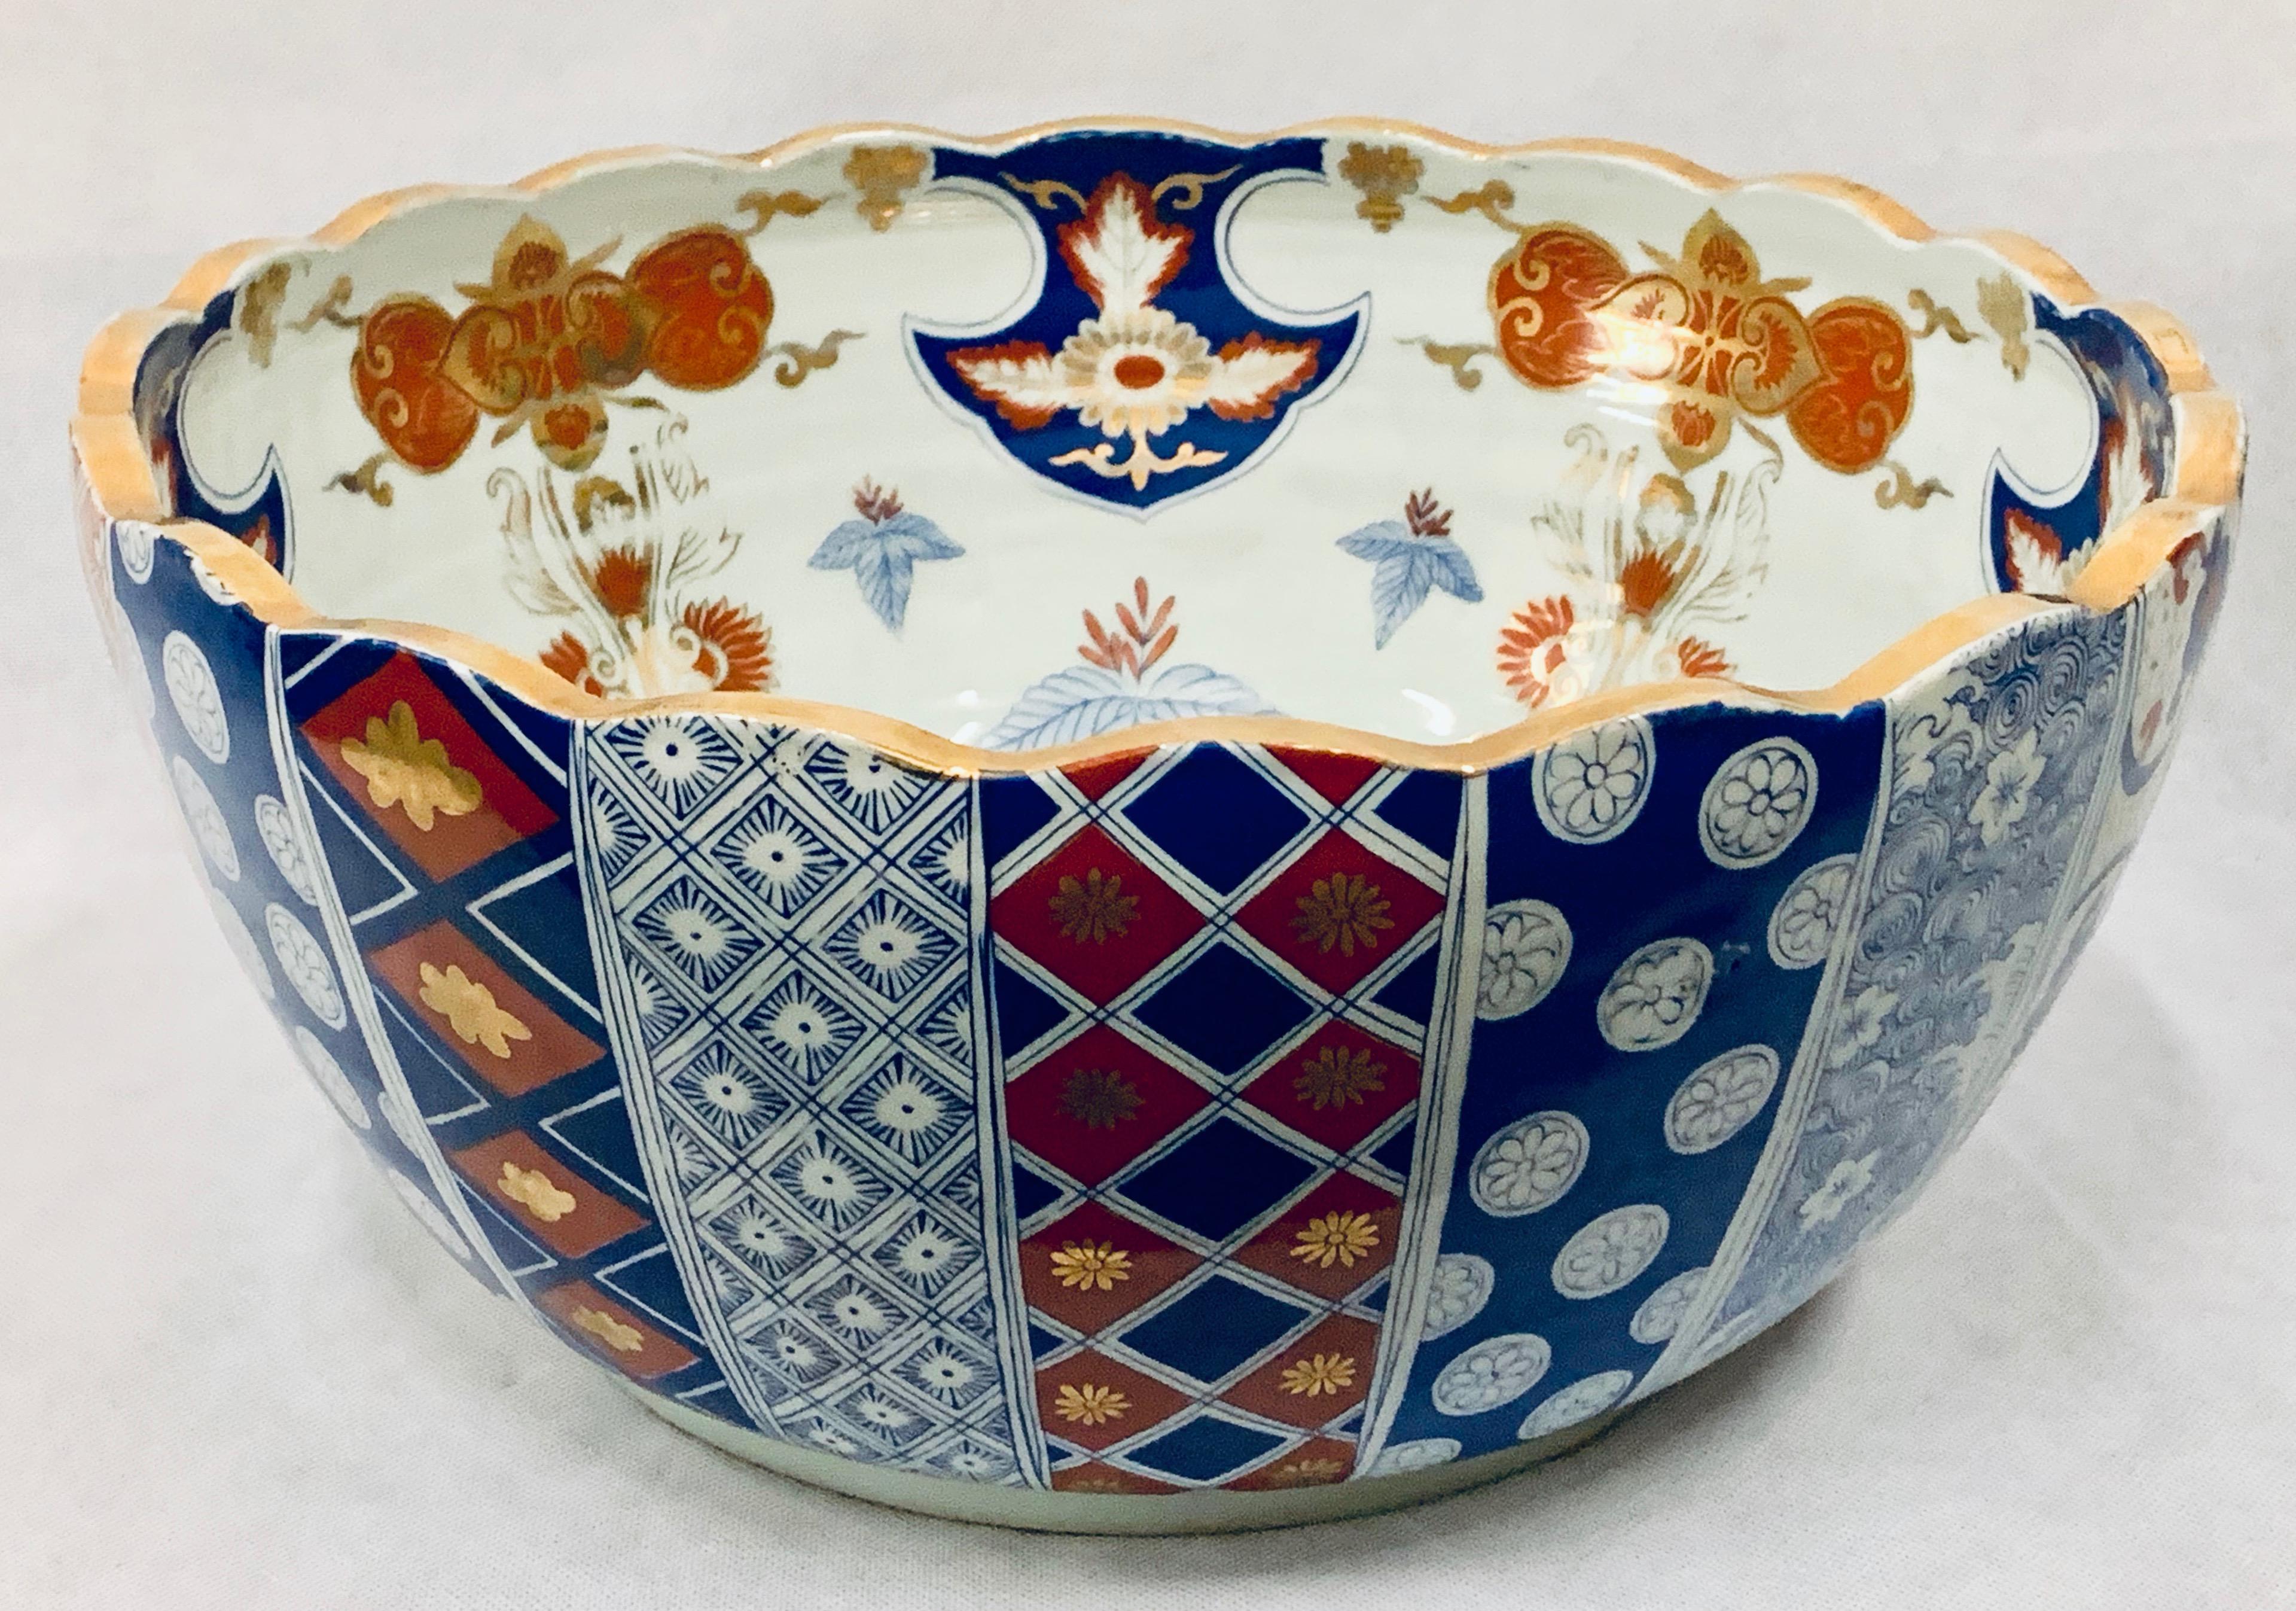 Large Meiji period porcelain Imari punchbowl. The interior has a charming mountainous scene with a house, pagoda, pine tree and waterfall all in underglaze blue. The surrounding area is filled with fish scale pattern and various leaves in iron red,